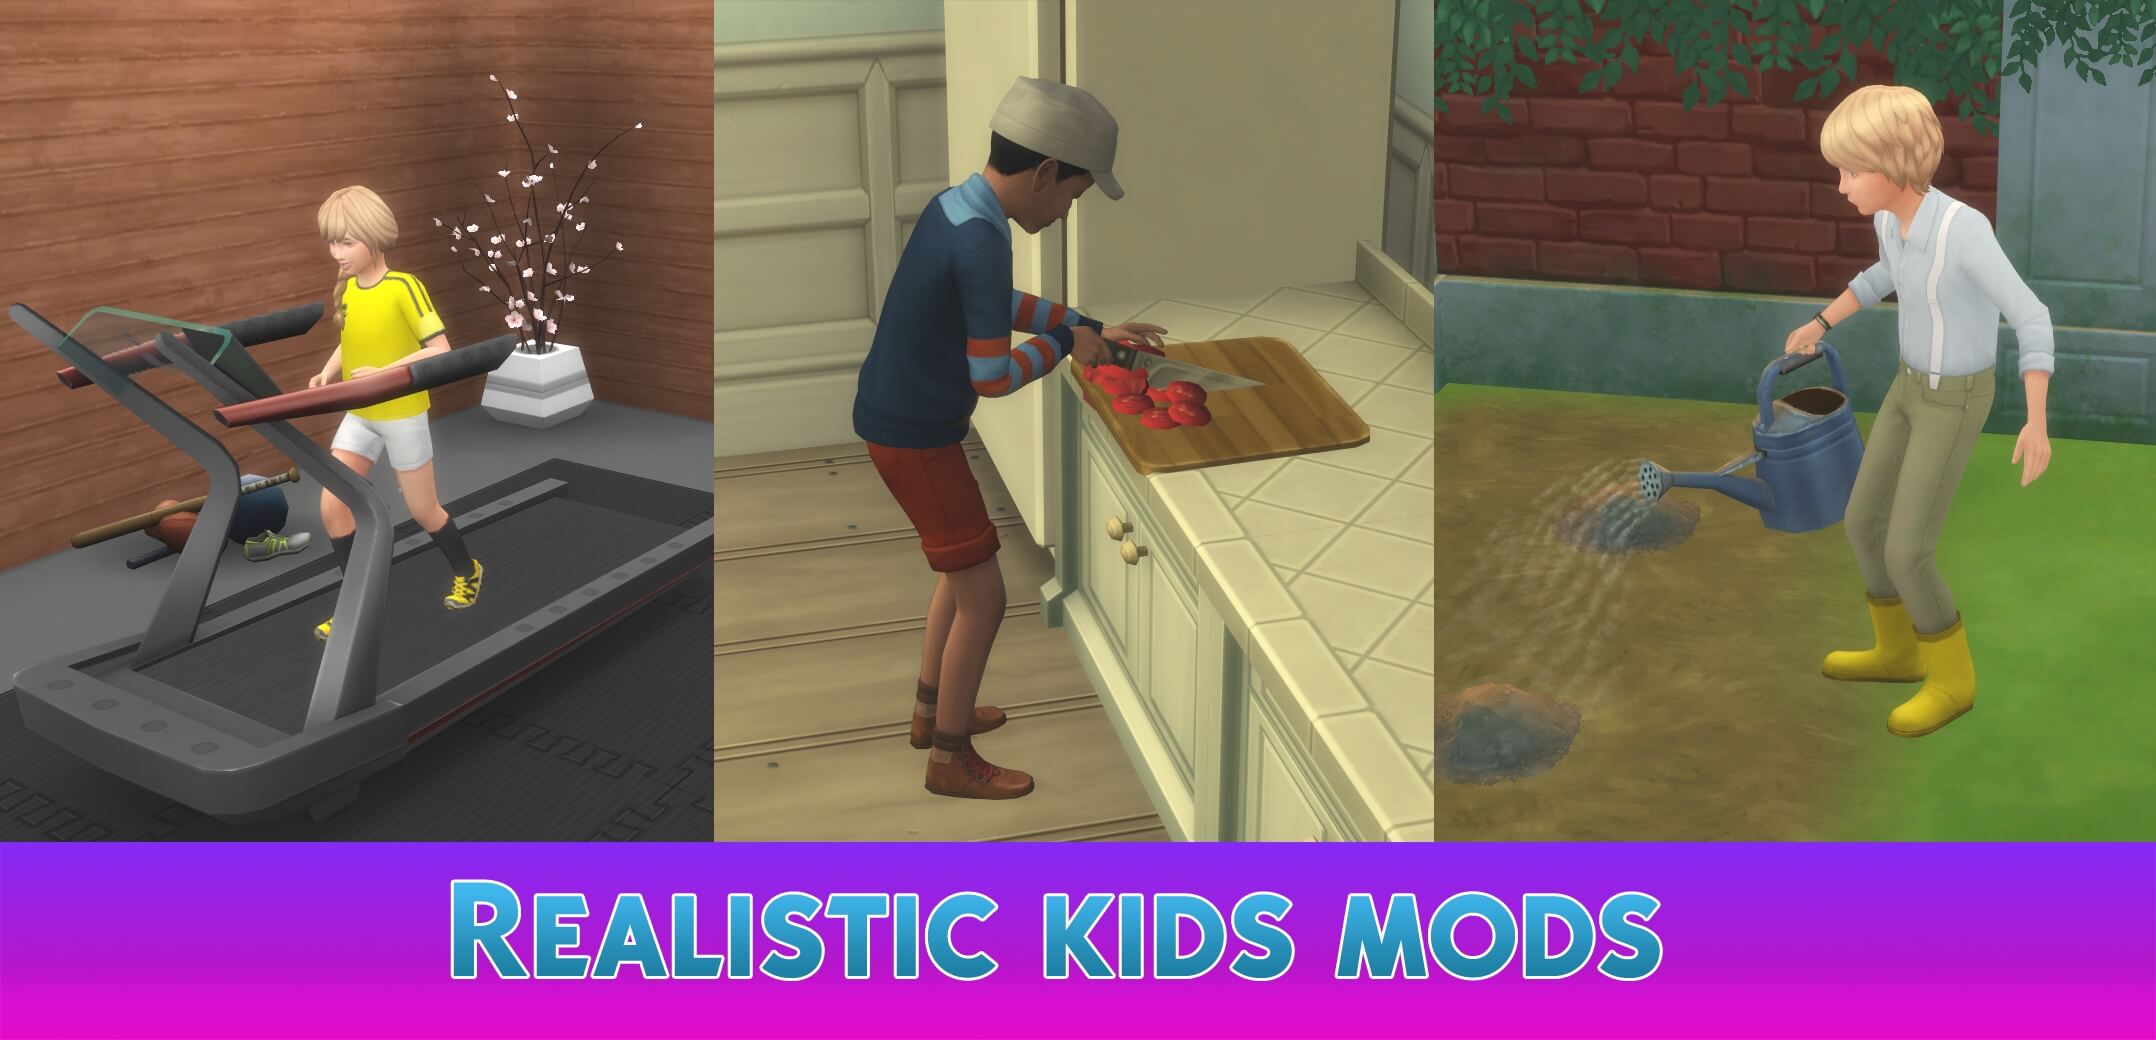 clean pack installer mod sims 2